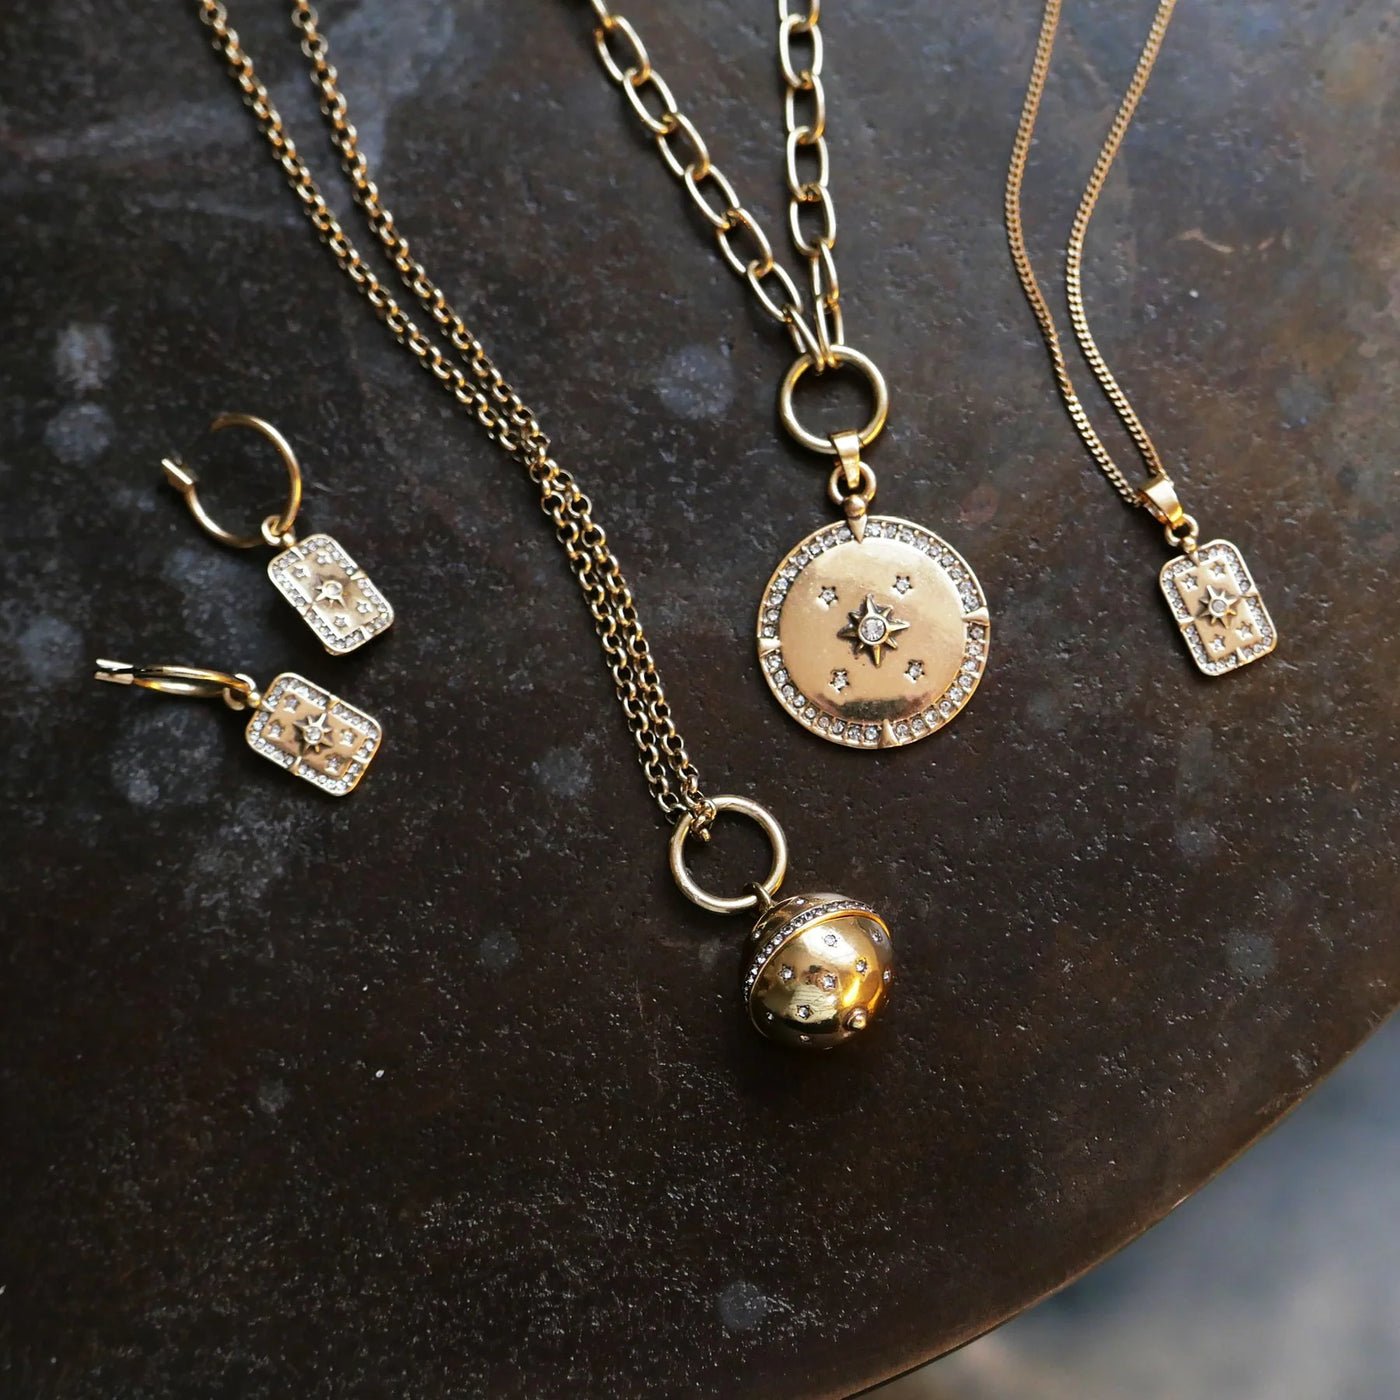 Astro Coin Necklace - Gold Plated